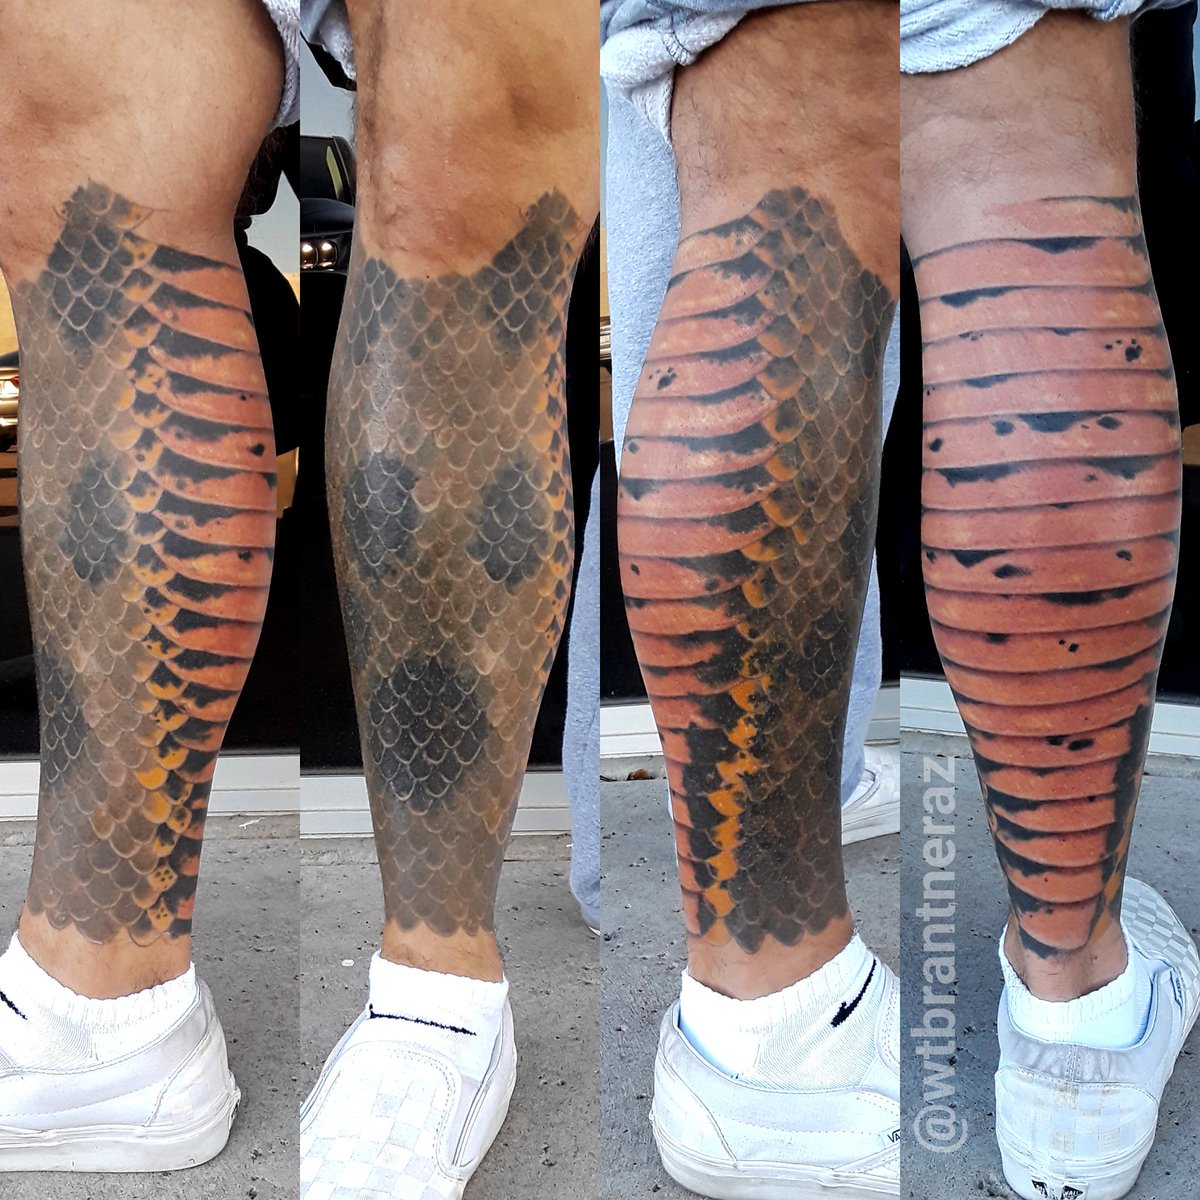 Understand and buy tattoo snake skin OFF-67